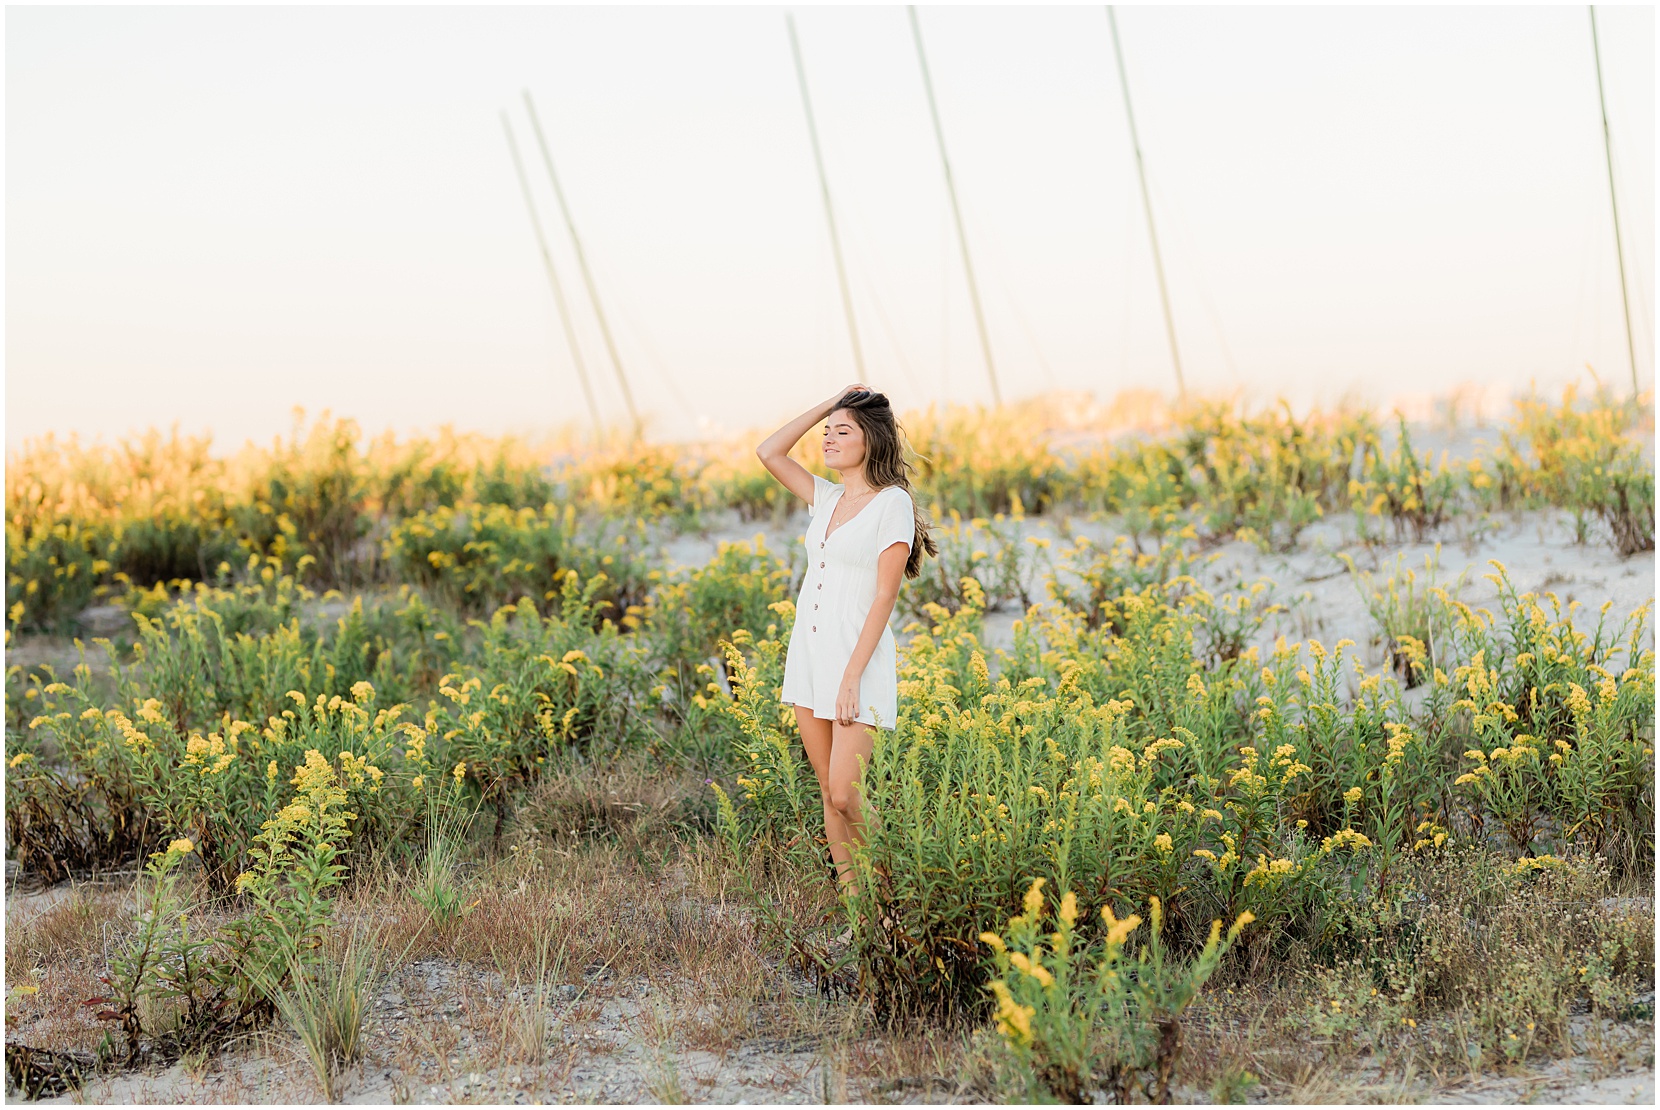 Teen girl posing in a field of yellow flowers on the beach in Ocean City, New Jersey.